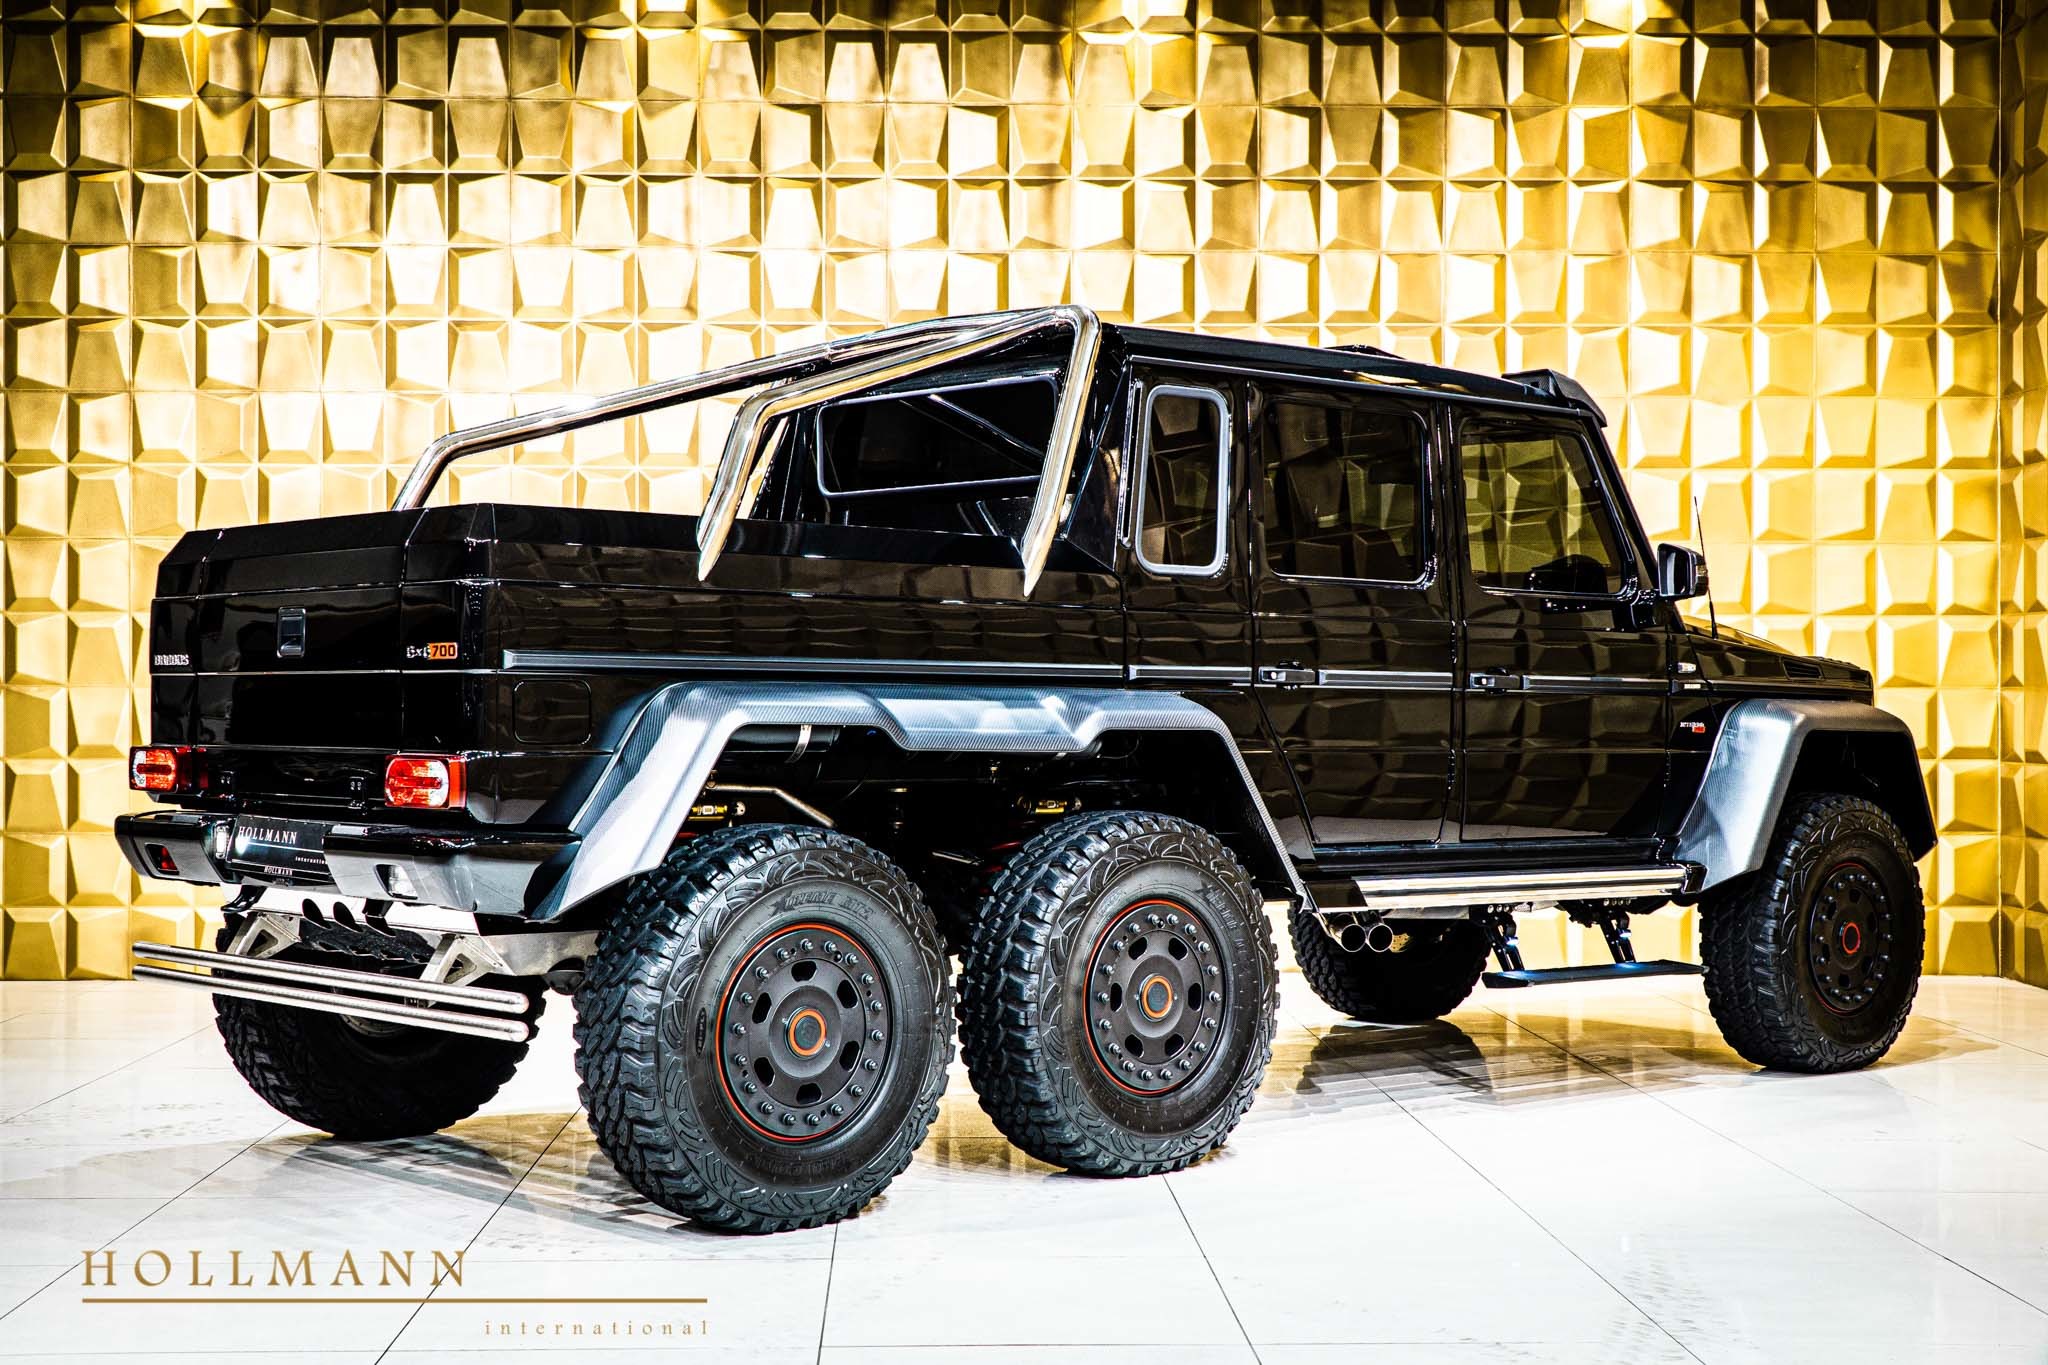 Mercedes Benz G63 Amg 6x6 By Brabus Has 700 Hp 1 Million Price Tag Carscoops